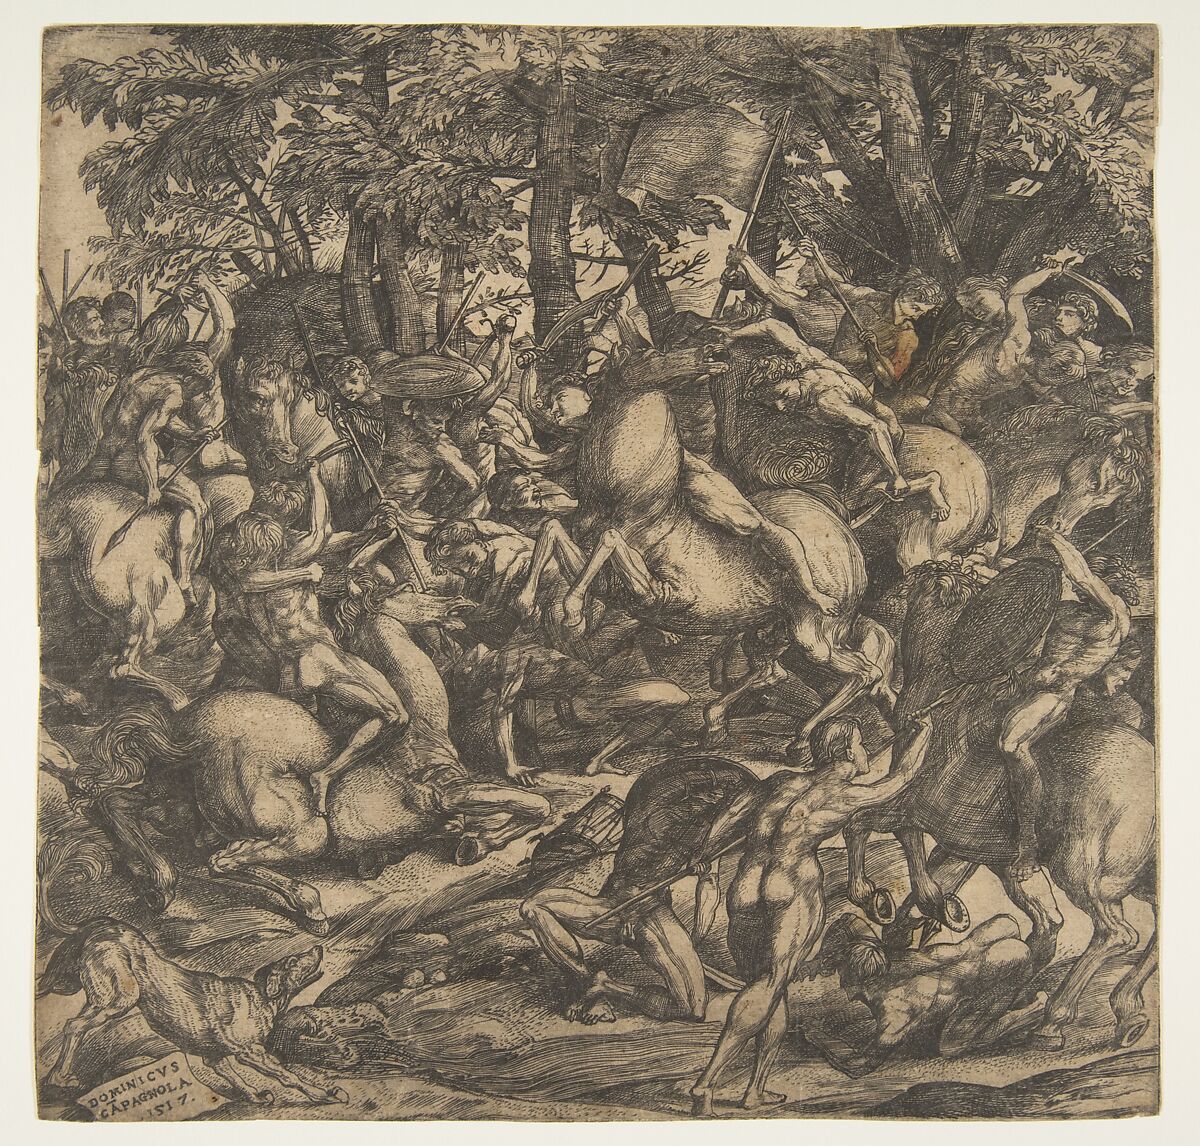 Group of naked men engaged in battle in a wooded landscape, some on horseback; a dog at lower left., Domenico Campagnola (Italian, Venice (?) 1500–1564 Padua), Engraving 